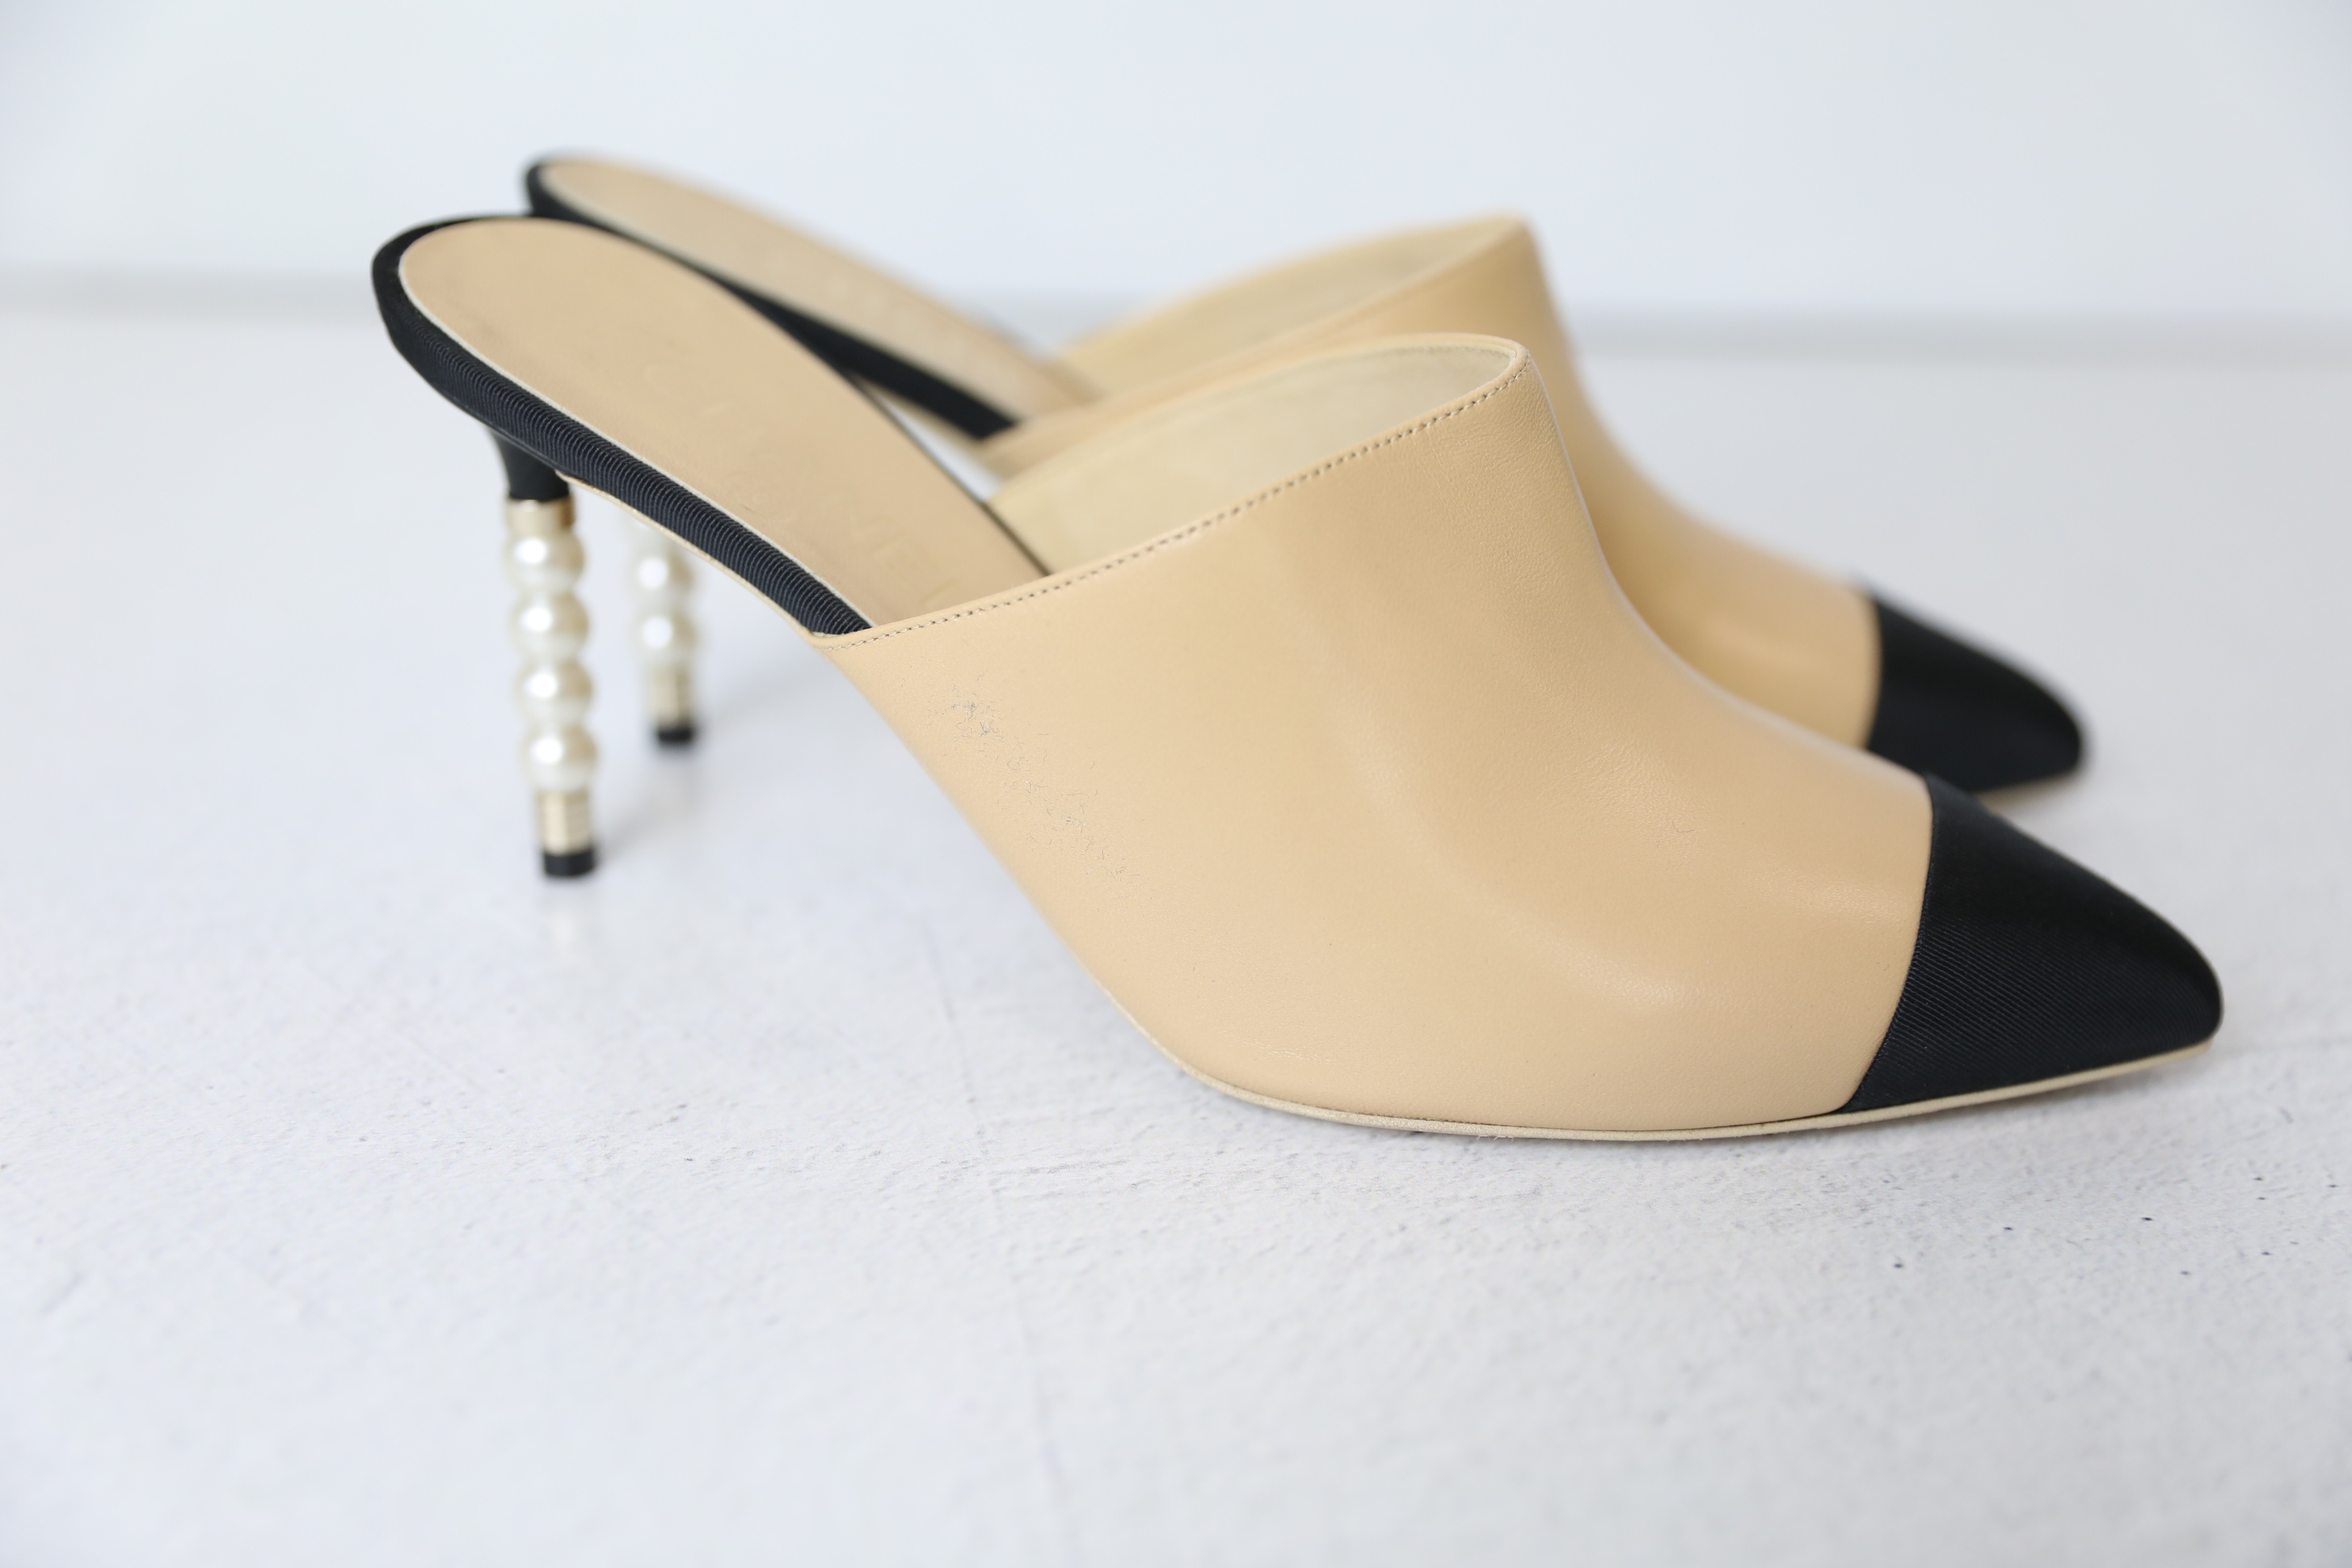 Chanel Shoes Pointed Mules with Pearl Heels, Beige and Black, Size 39, New  in Box WA001 - Julia Rose Boston